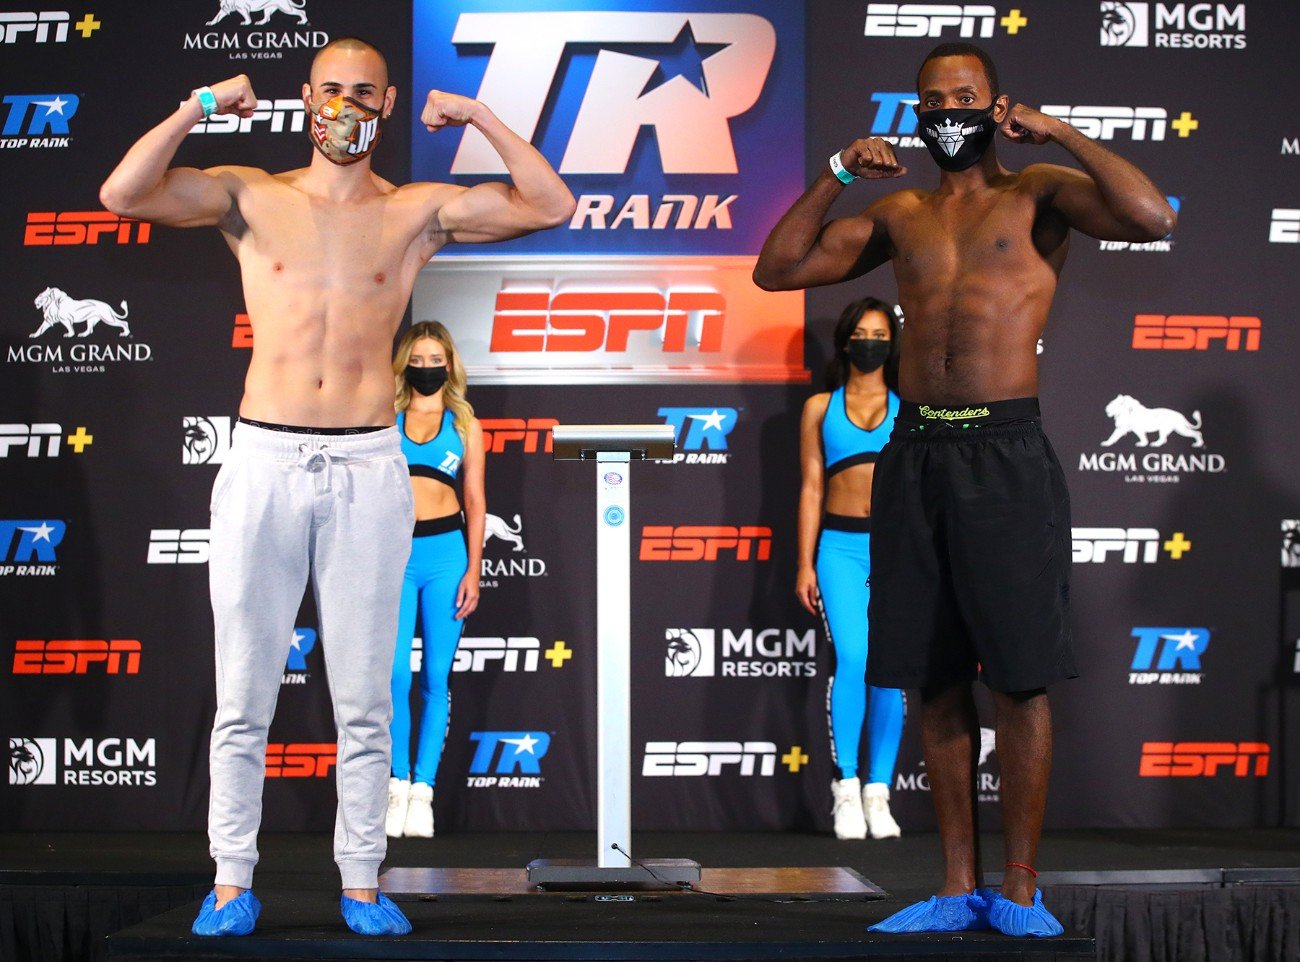 Image: Jose Pedraza 140.4 lbs vs. Mikkel LesPierre 141-lbs - weigh-in results